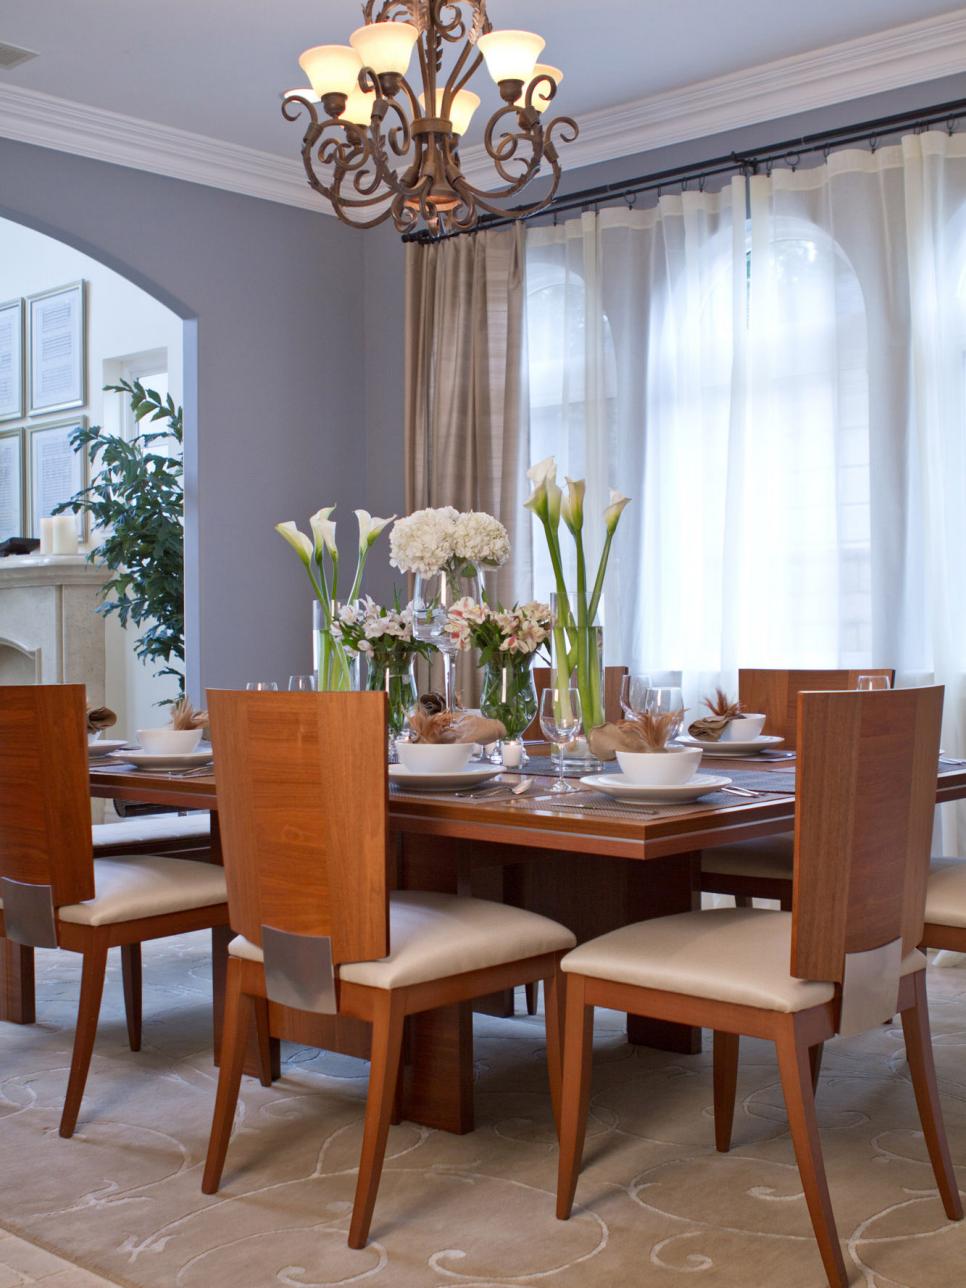 Bright Transitional Dining Room With Chandelier and Contemporary Chair